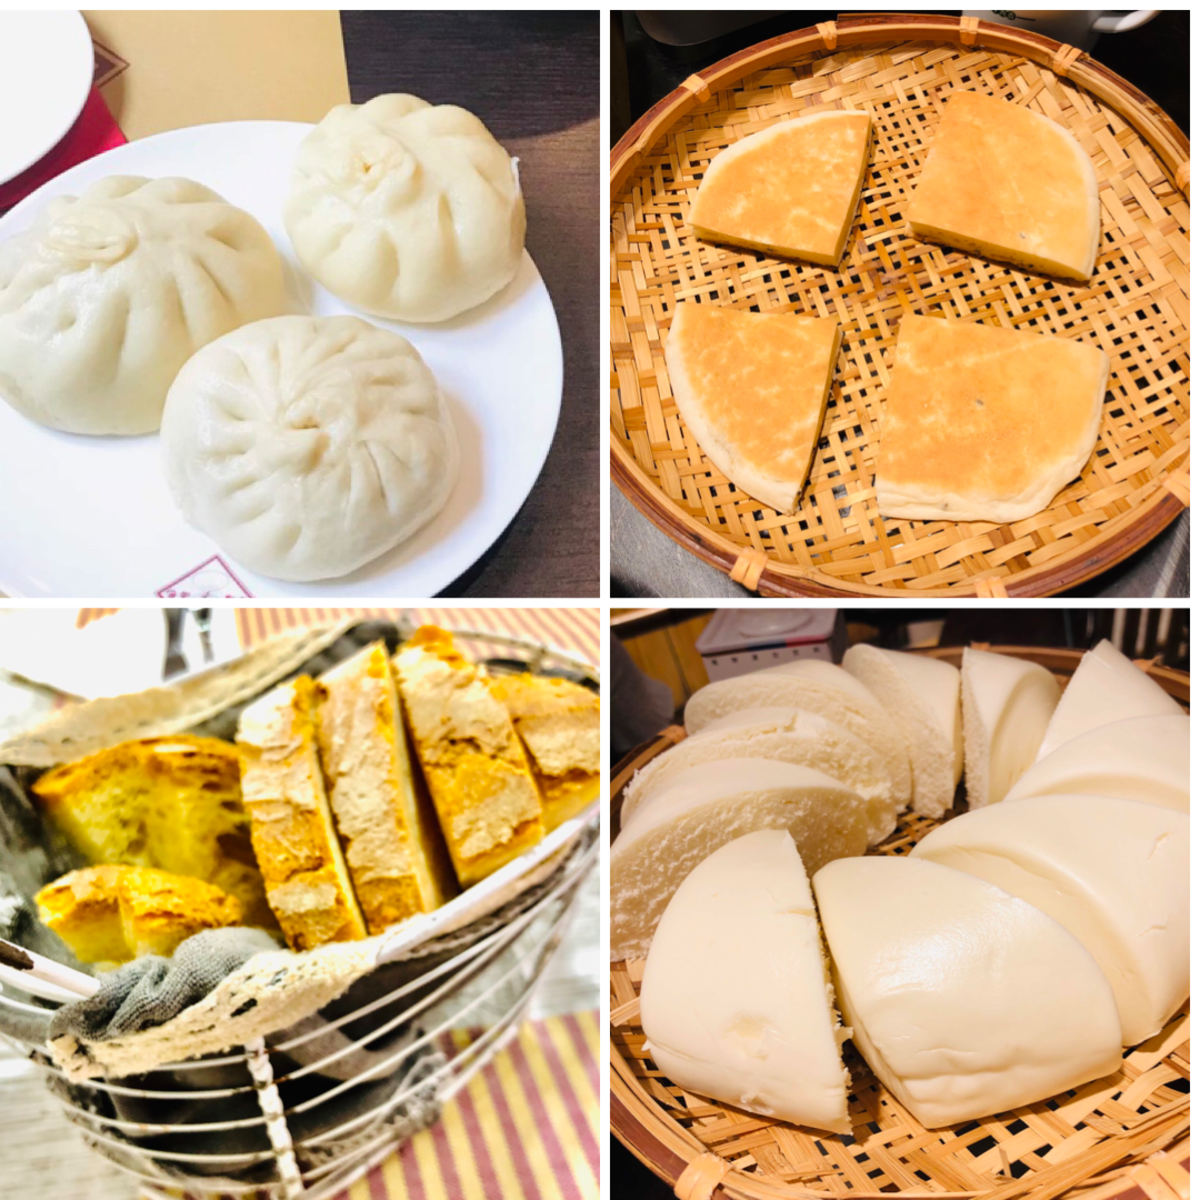 Clockwise from top left: Chinese baozi, flat buns, mantou, and Italian bread.